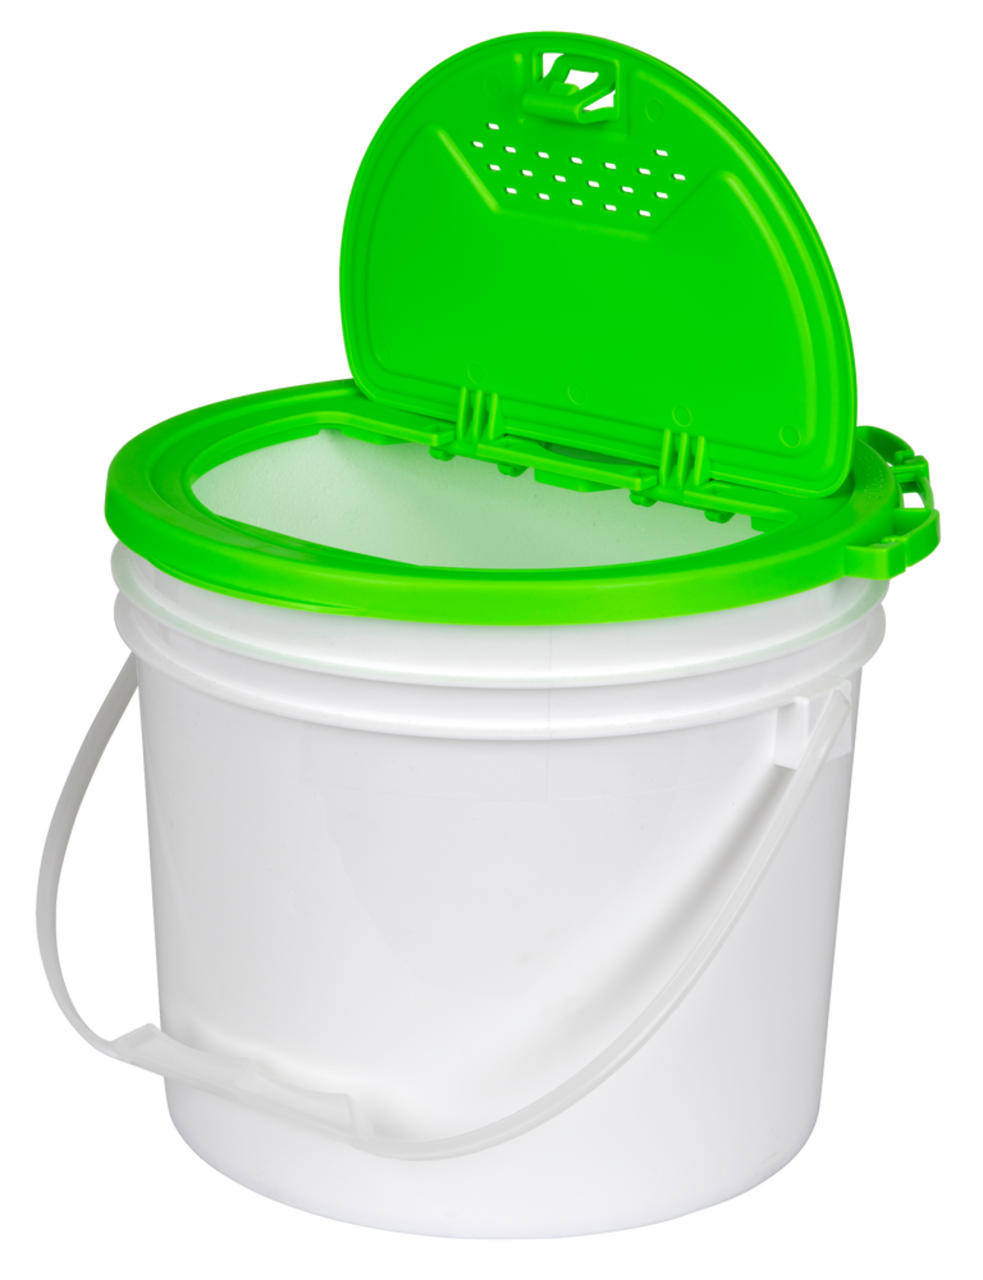 https://media-www.canadiantire.ca/product/playing/fishing/ice-fishing/0774531/flambeau-insulated-bait-bucket-3-5-gal-ea4ea91a-0eee-431d-8ed7-c7243ffd2380.png?imdensity=1&imwidth=1244&impolicy=mZoom